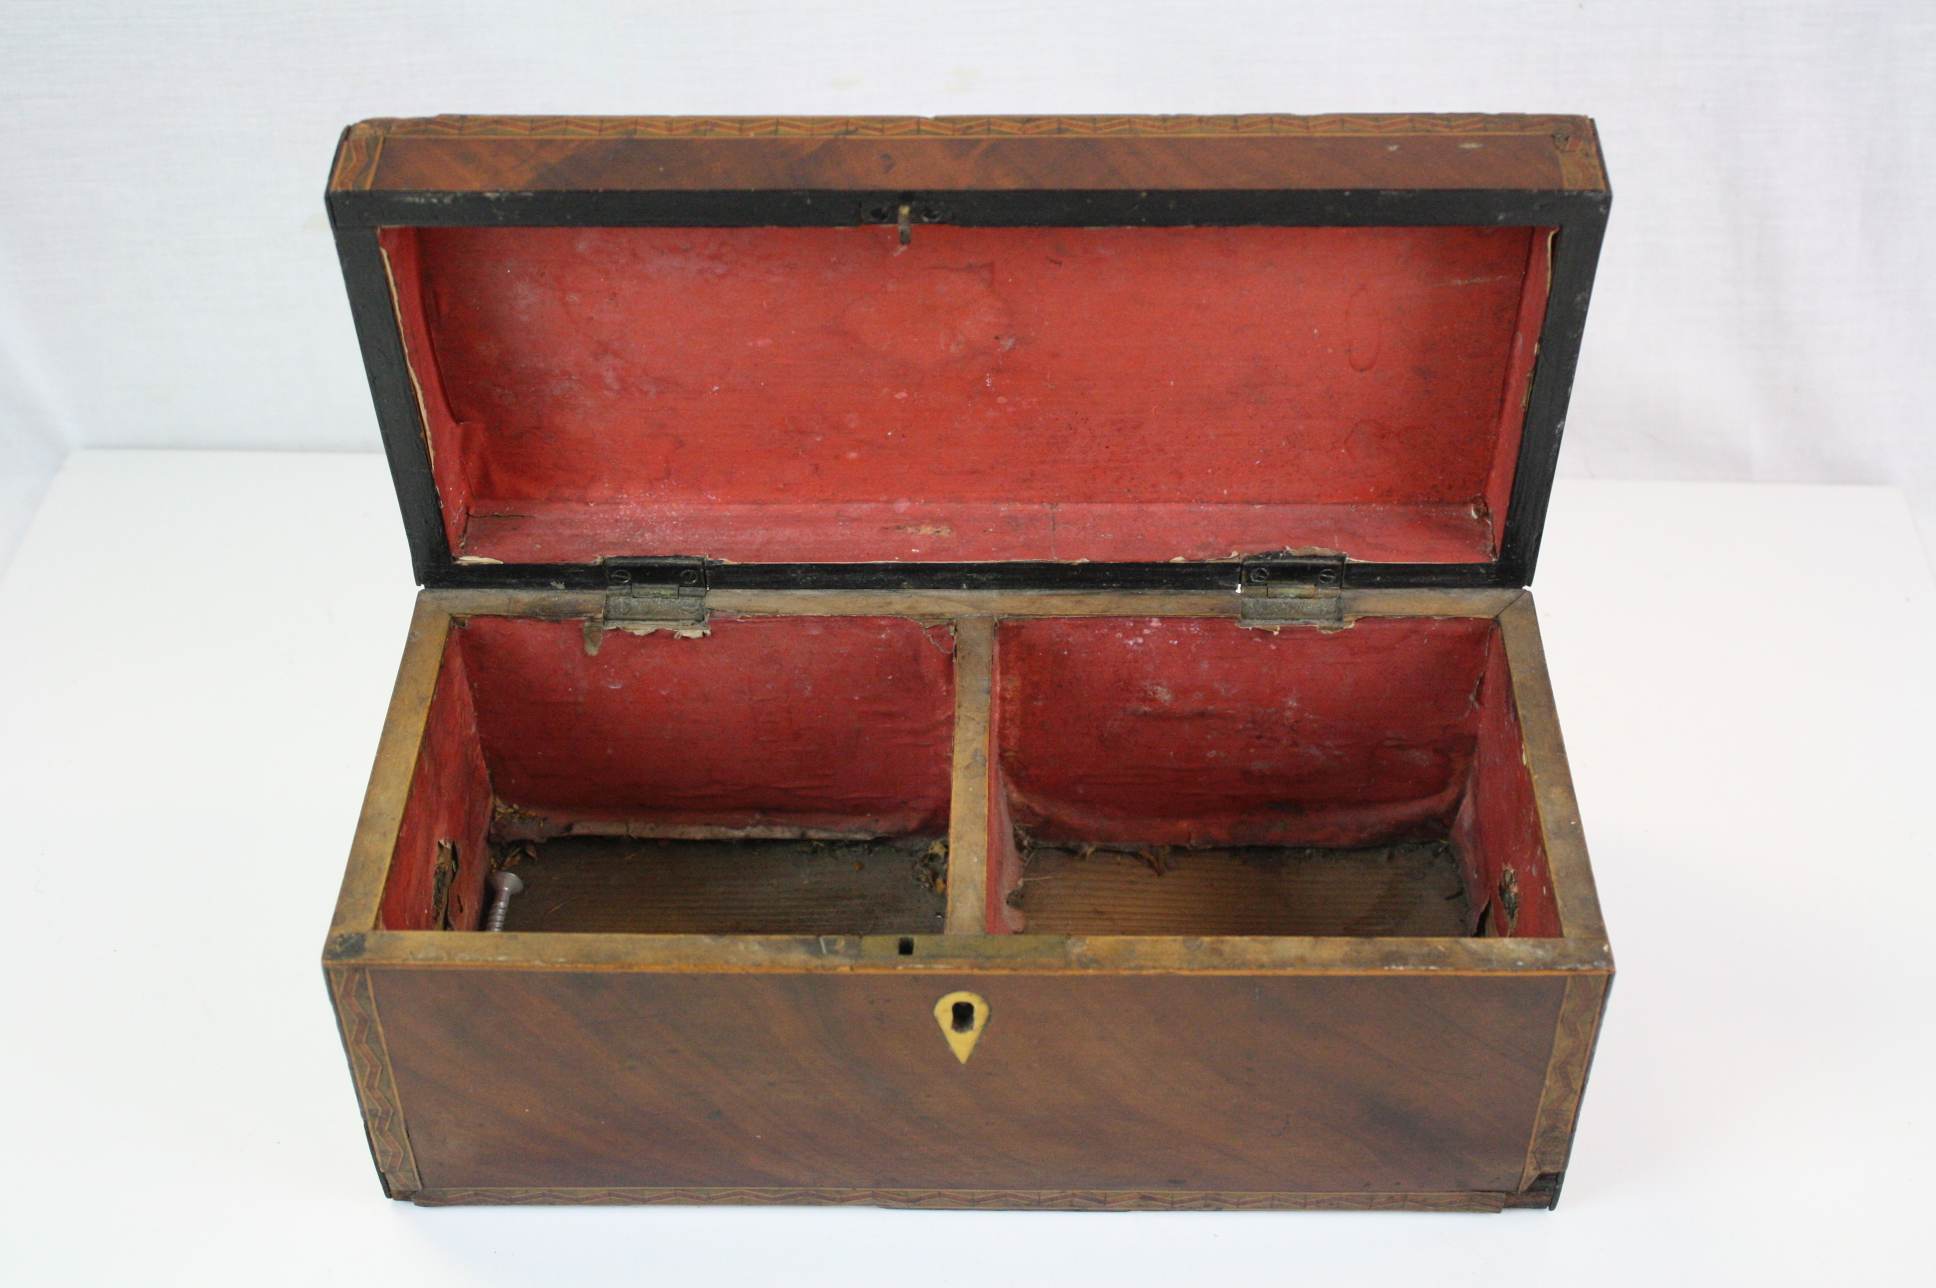 19th century Flamed Mahogany Two Section Box - Image 2 of 4